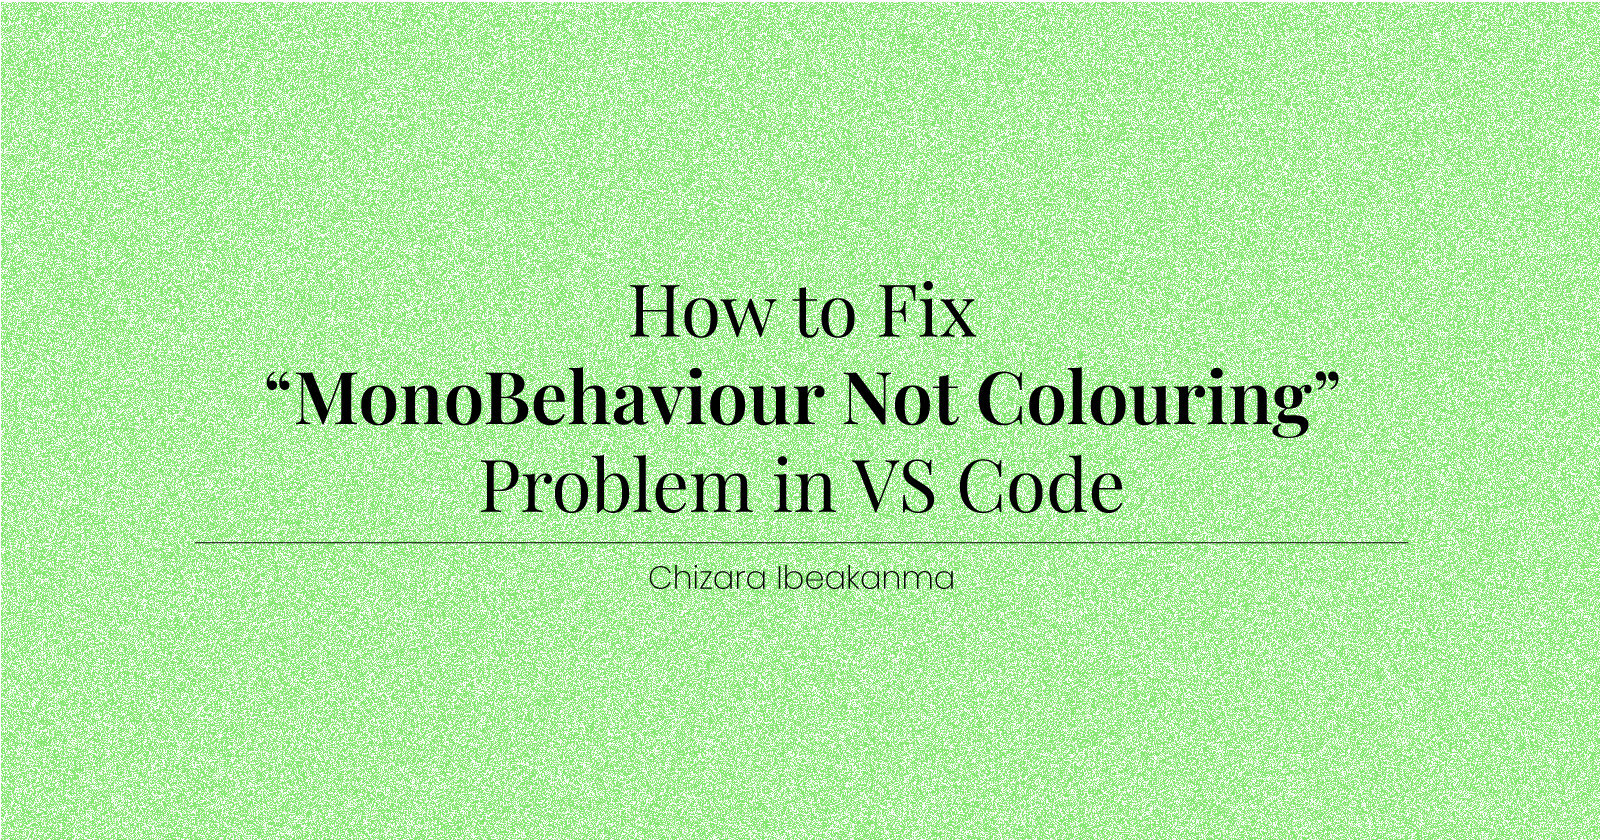 How to Fix "MonoBehaviour Not Colouring" Problem in VS Code